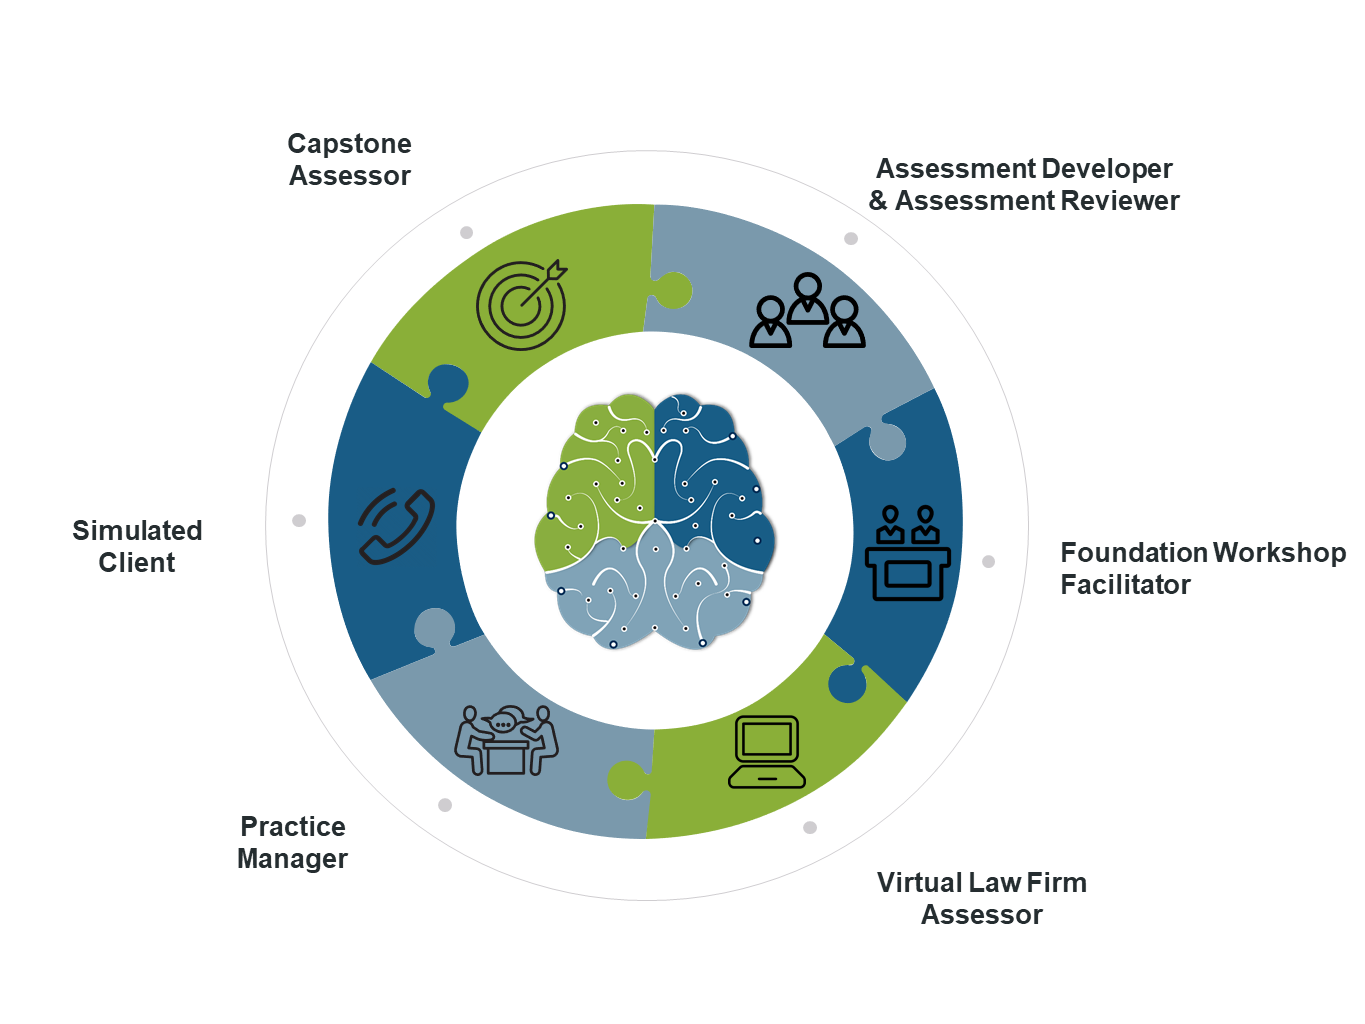 Roles in our organization presented around a wheel with icons: Capstone Assessor, Assessment Developer & Assessmsnt reviewer, Simulated Client, Foundation Workshop Facilitator, Practice Magnager, Virtual Law Firm Assessor. See availablility and further description below.